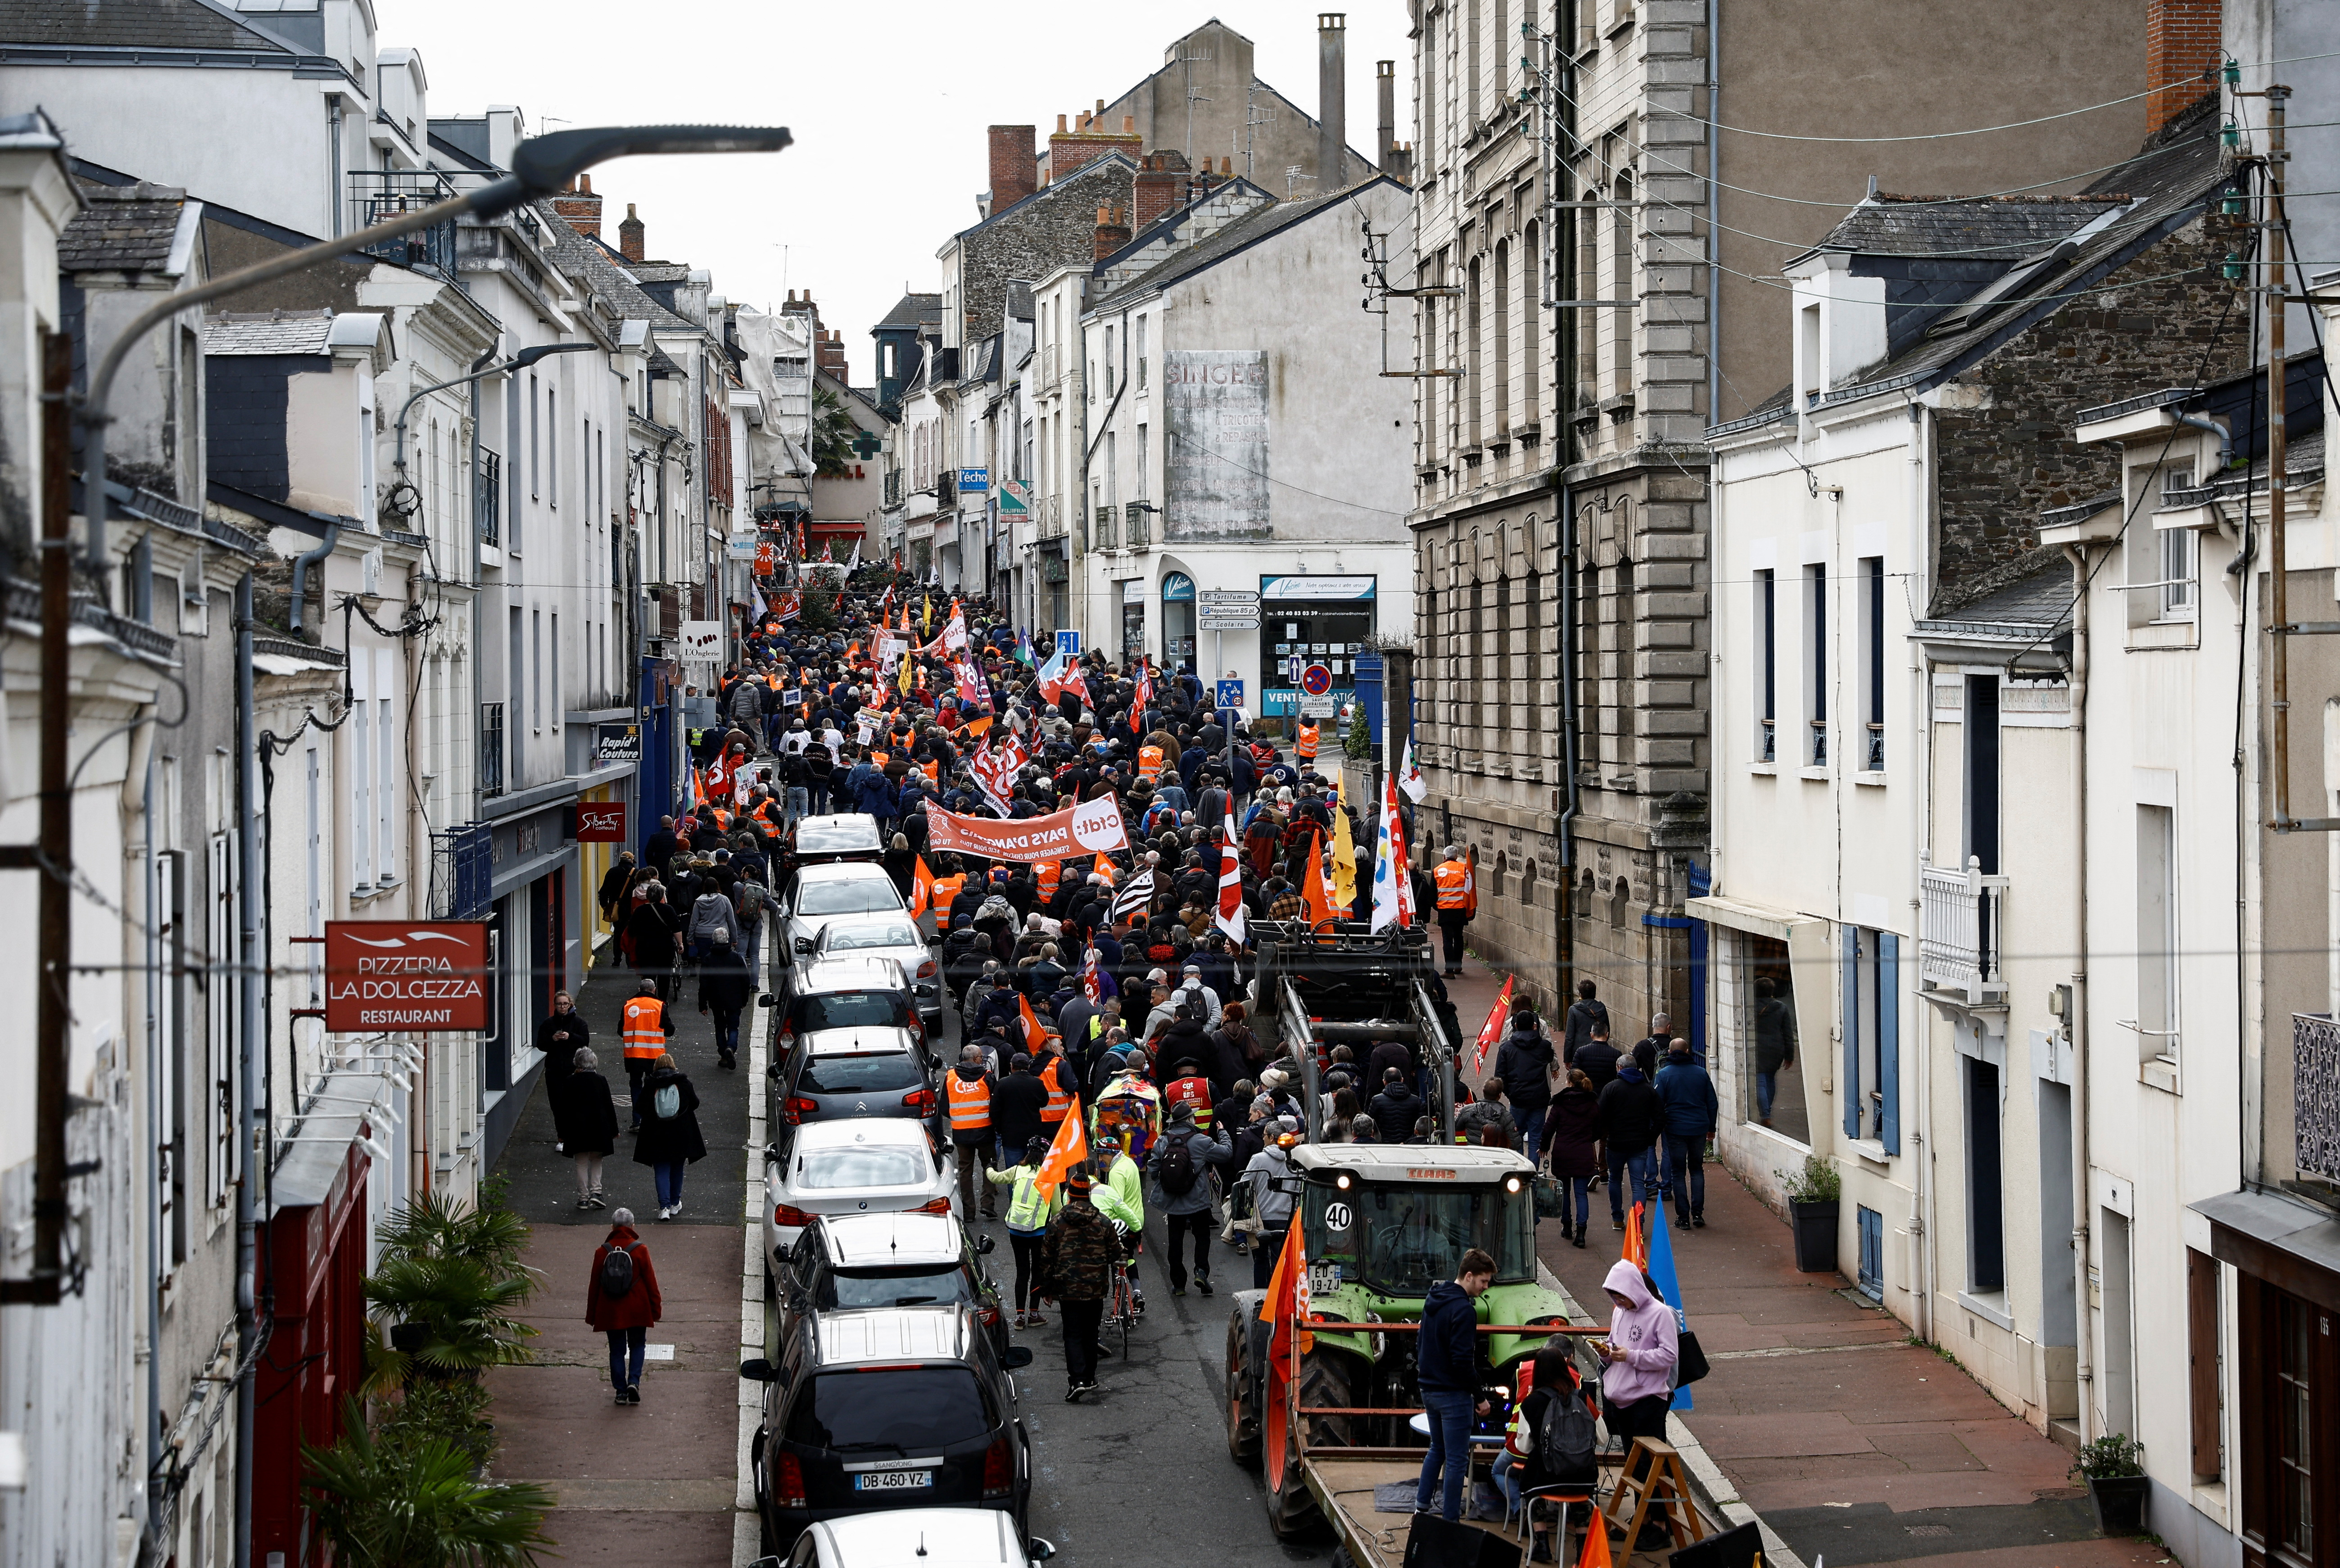 Eighth day of national protest in France against the pension reform